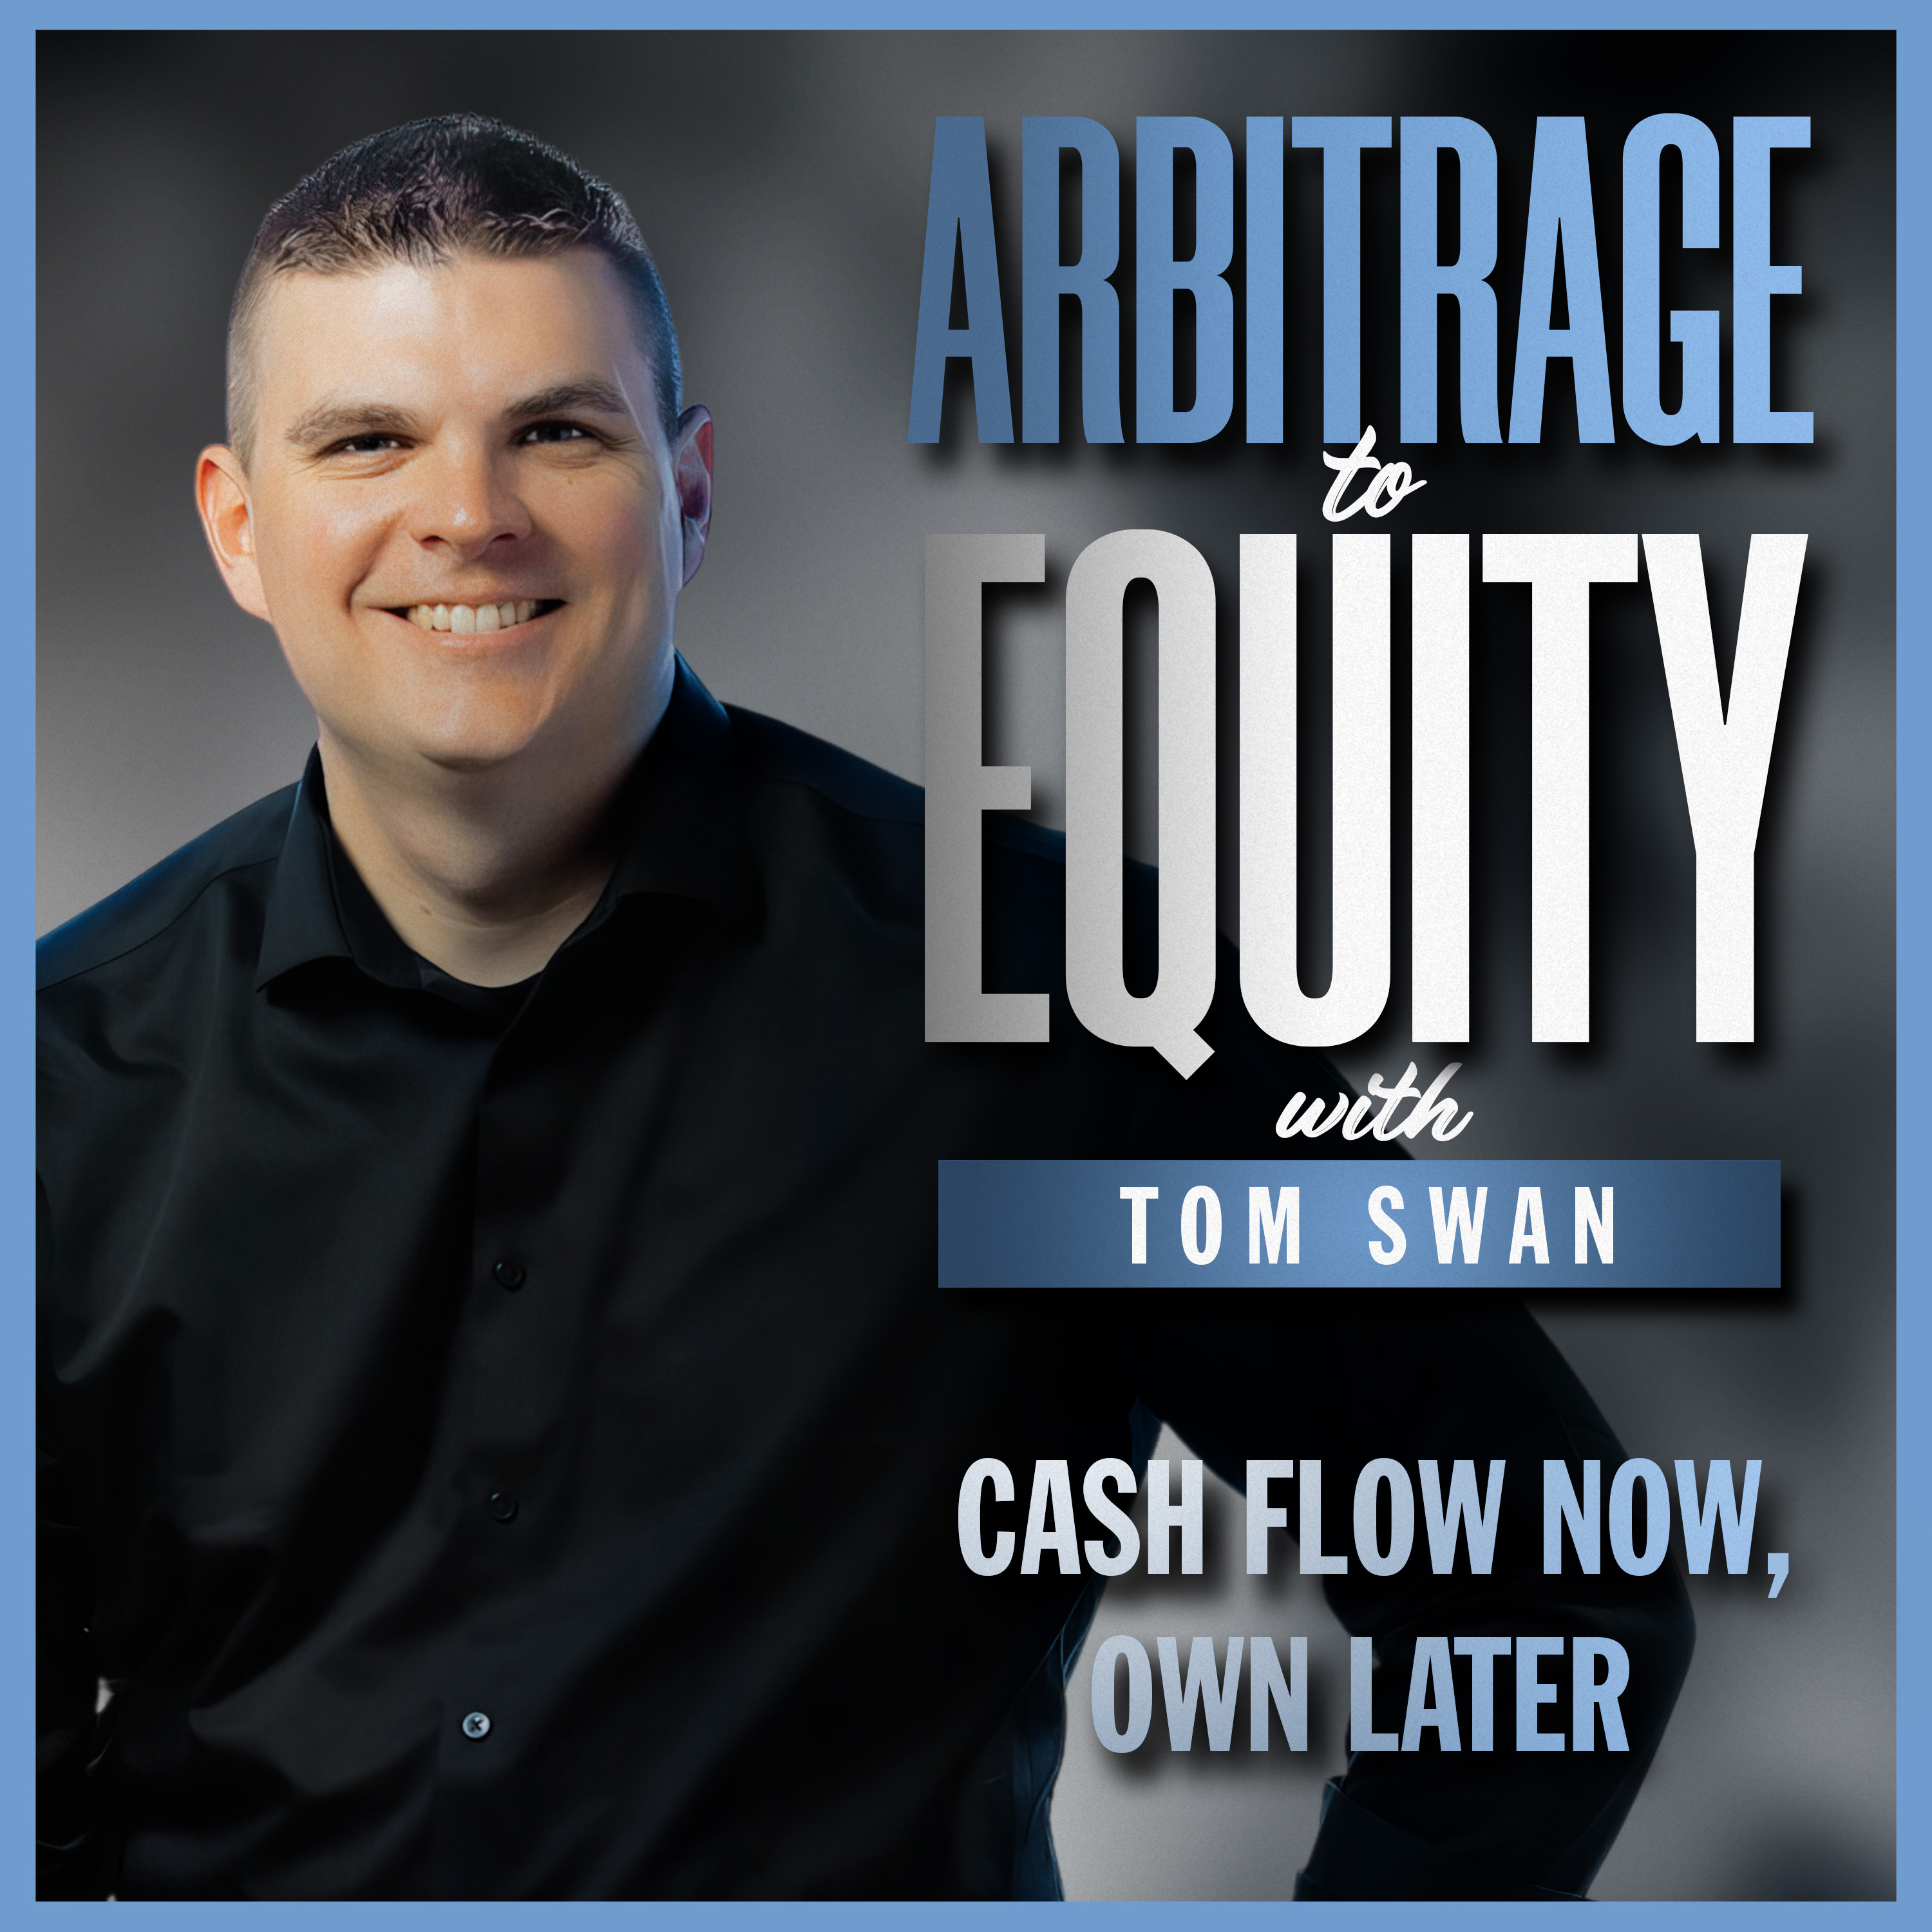 Artwork for Arbitrage to Equity: Cash Flow Now Own Later